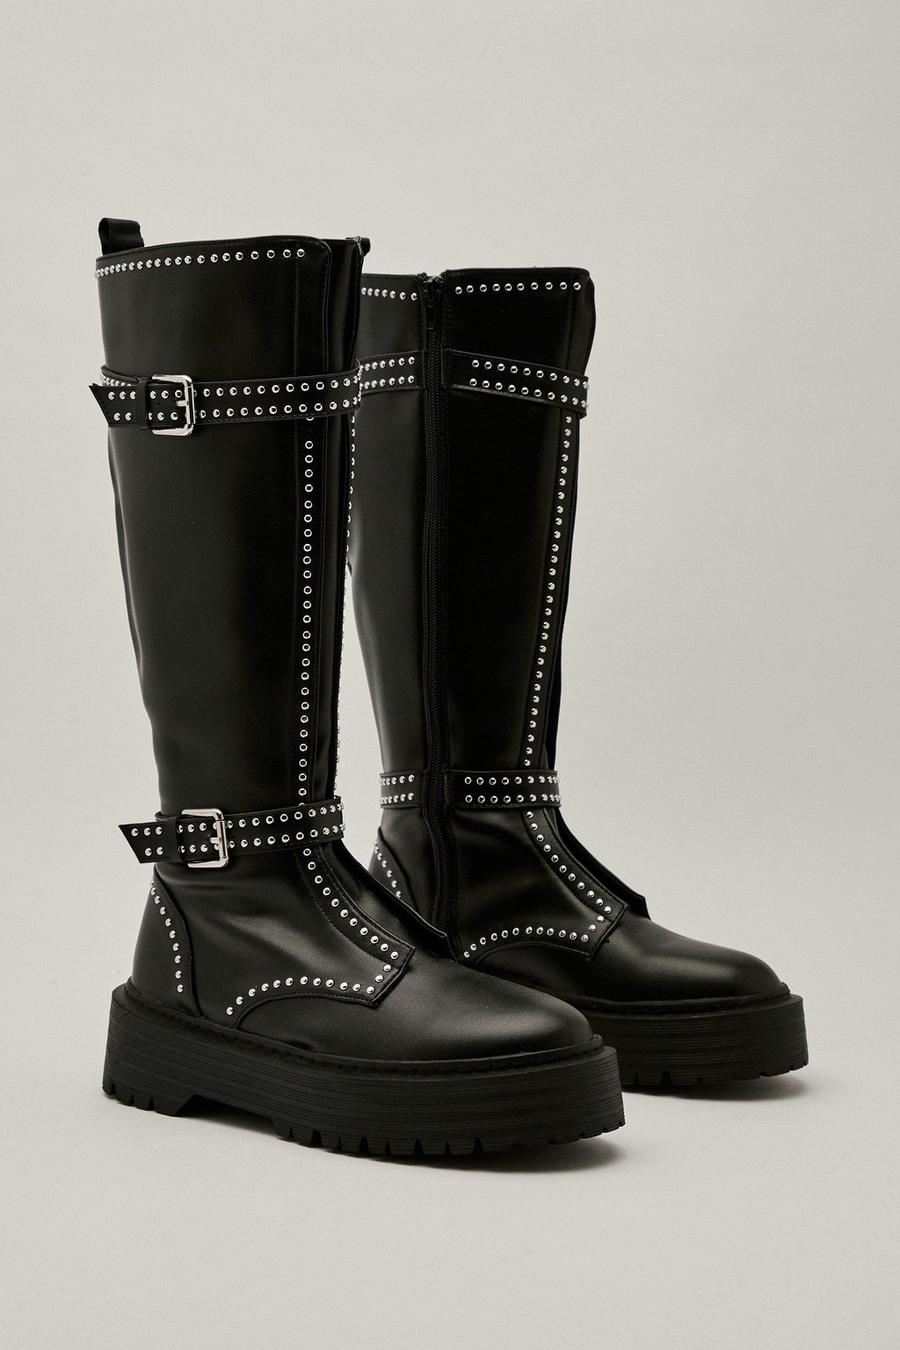 Black Faux Leather Double Buckle Studded Calf High Boots